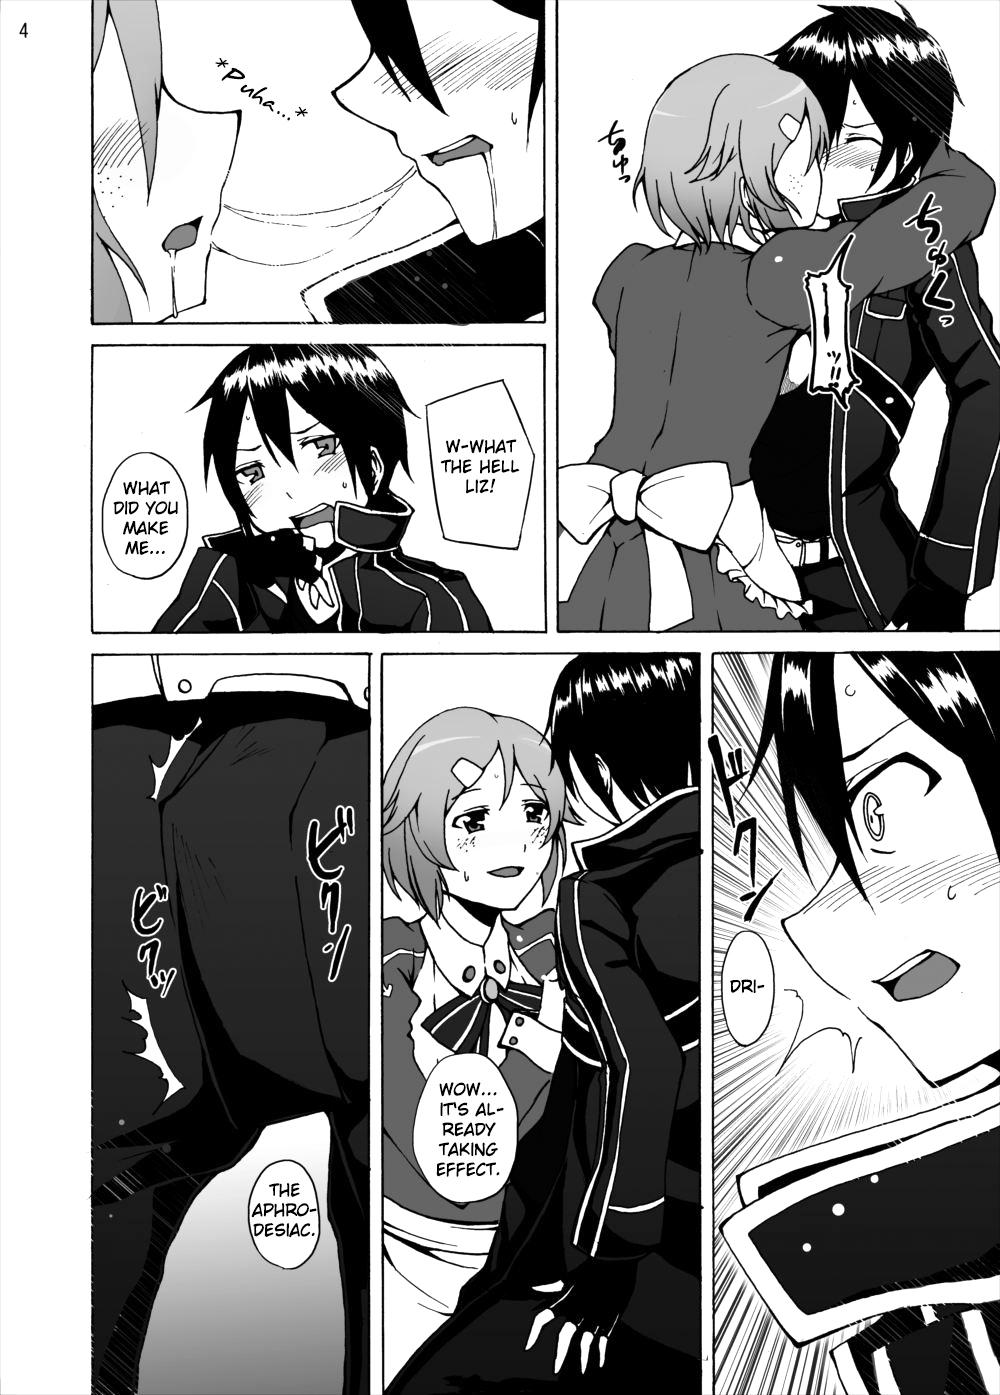 Penis Lisbeth's Decision...To Steal Kirito From Asuna Even if She Has to Use a Dangerous Drug - Sword art online Bribe - Page 4